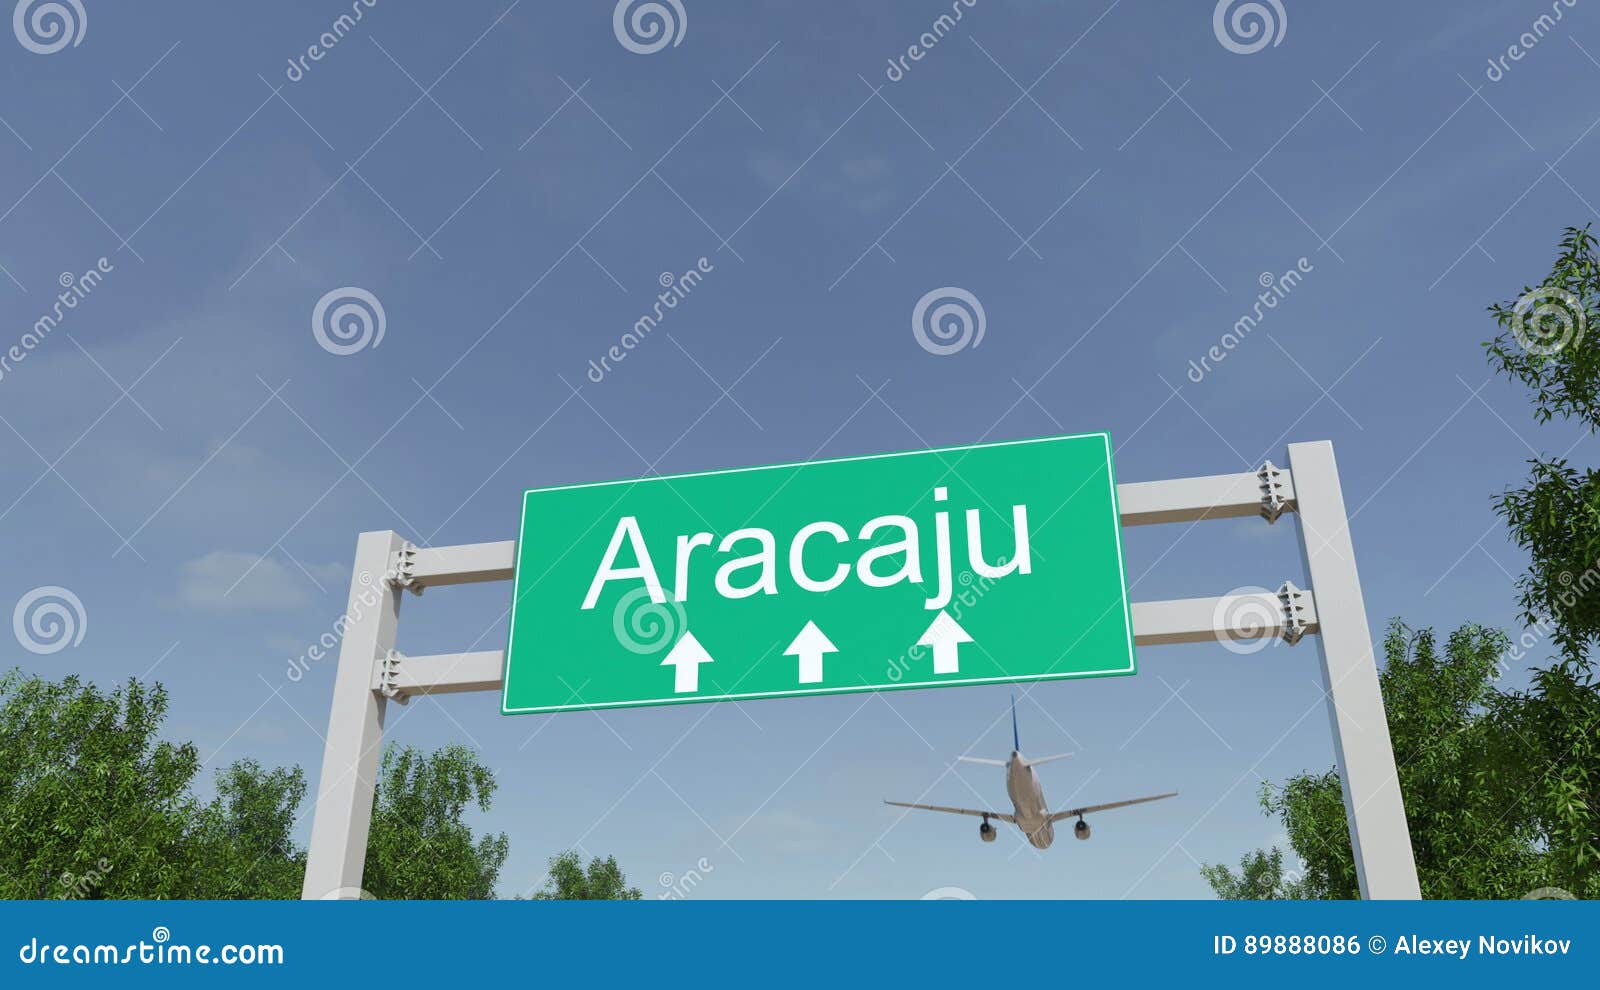 airplane arriving to aracaju airport. travelling to brazil conceptual 3d rendering